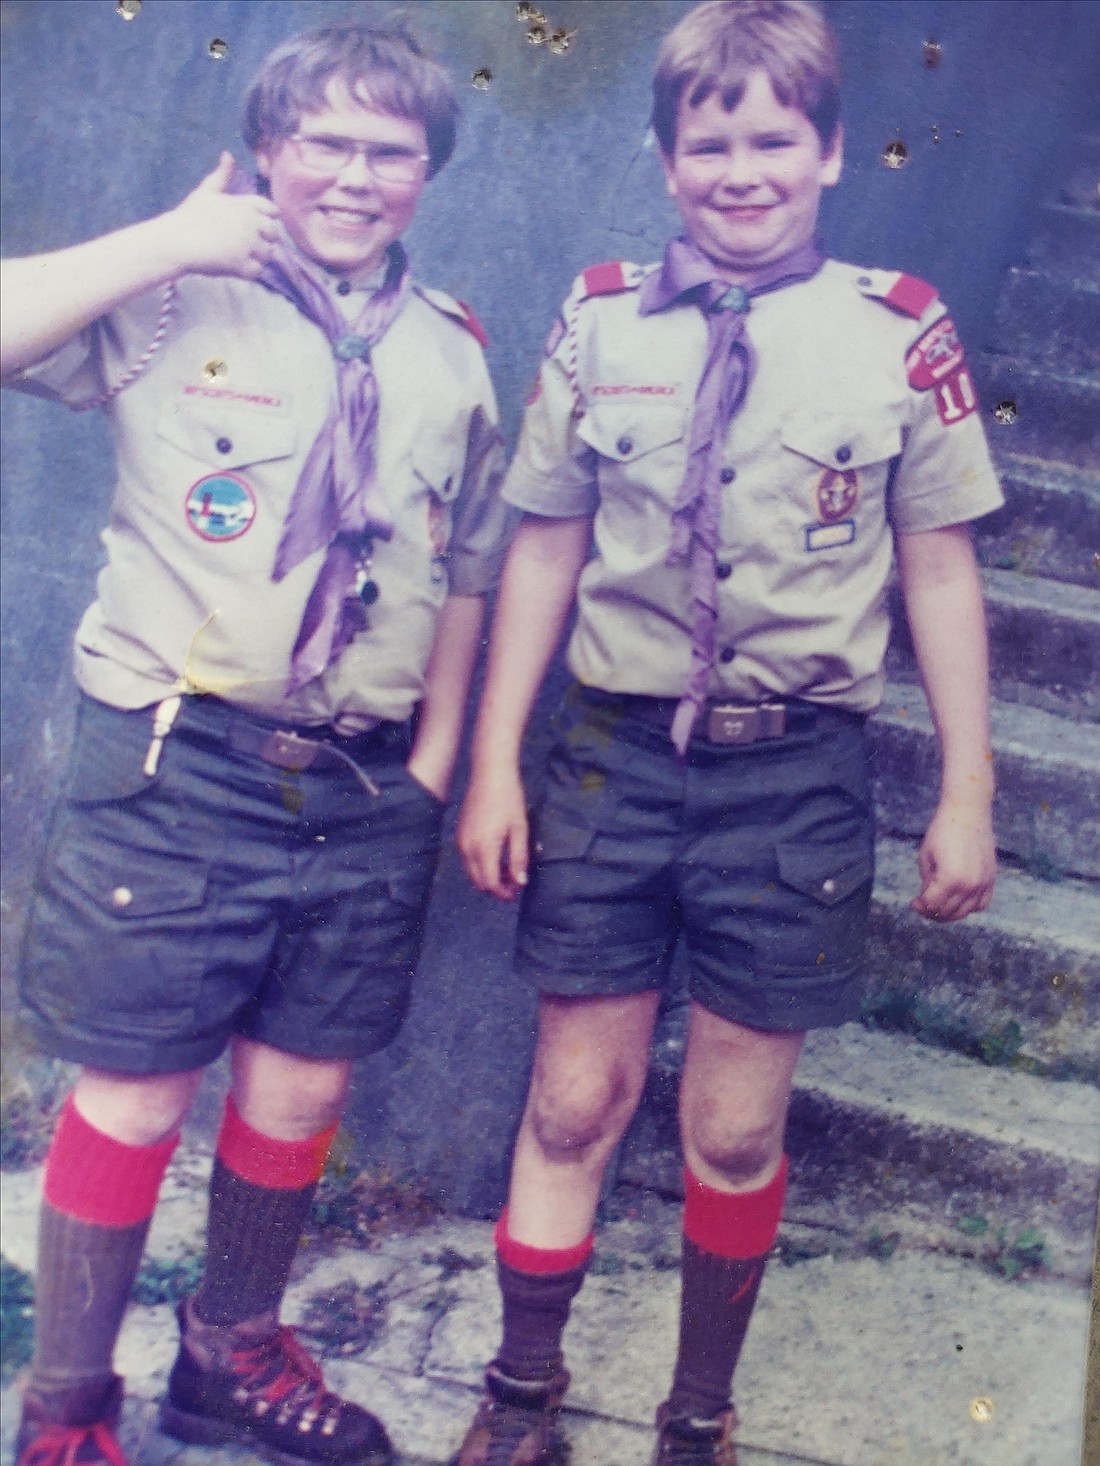 Scott Fairbanks, left, and Jason D. Martin in the early 1980s after a successful — but very dirty — camping trip. Fairbanks died shortly before the pandemic at the age of 47. He shared Martin's opinion that being a scout made him who he was.